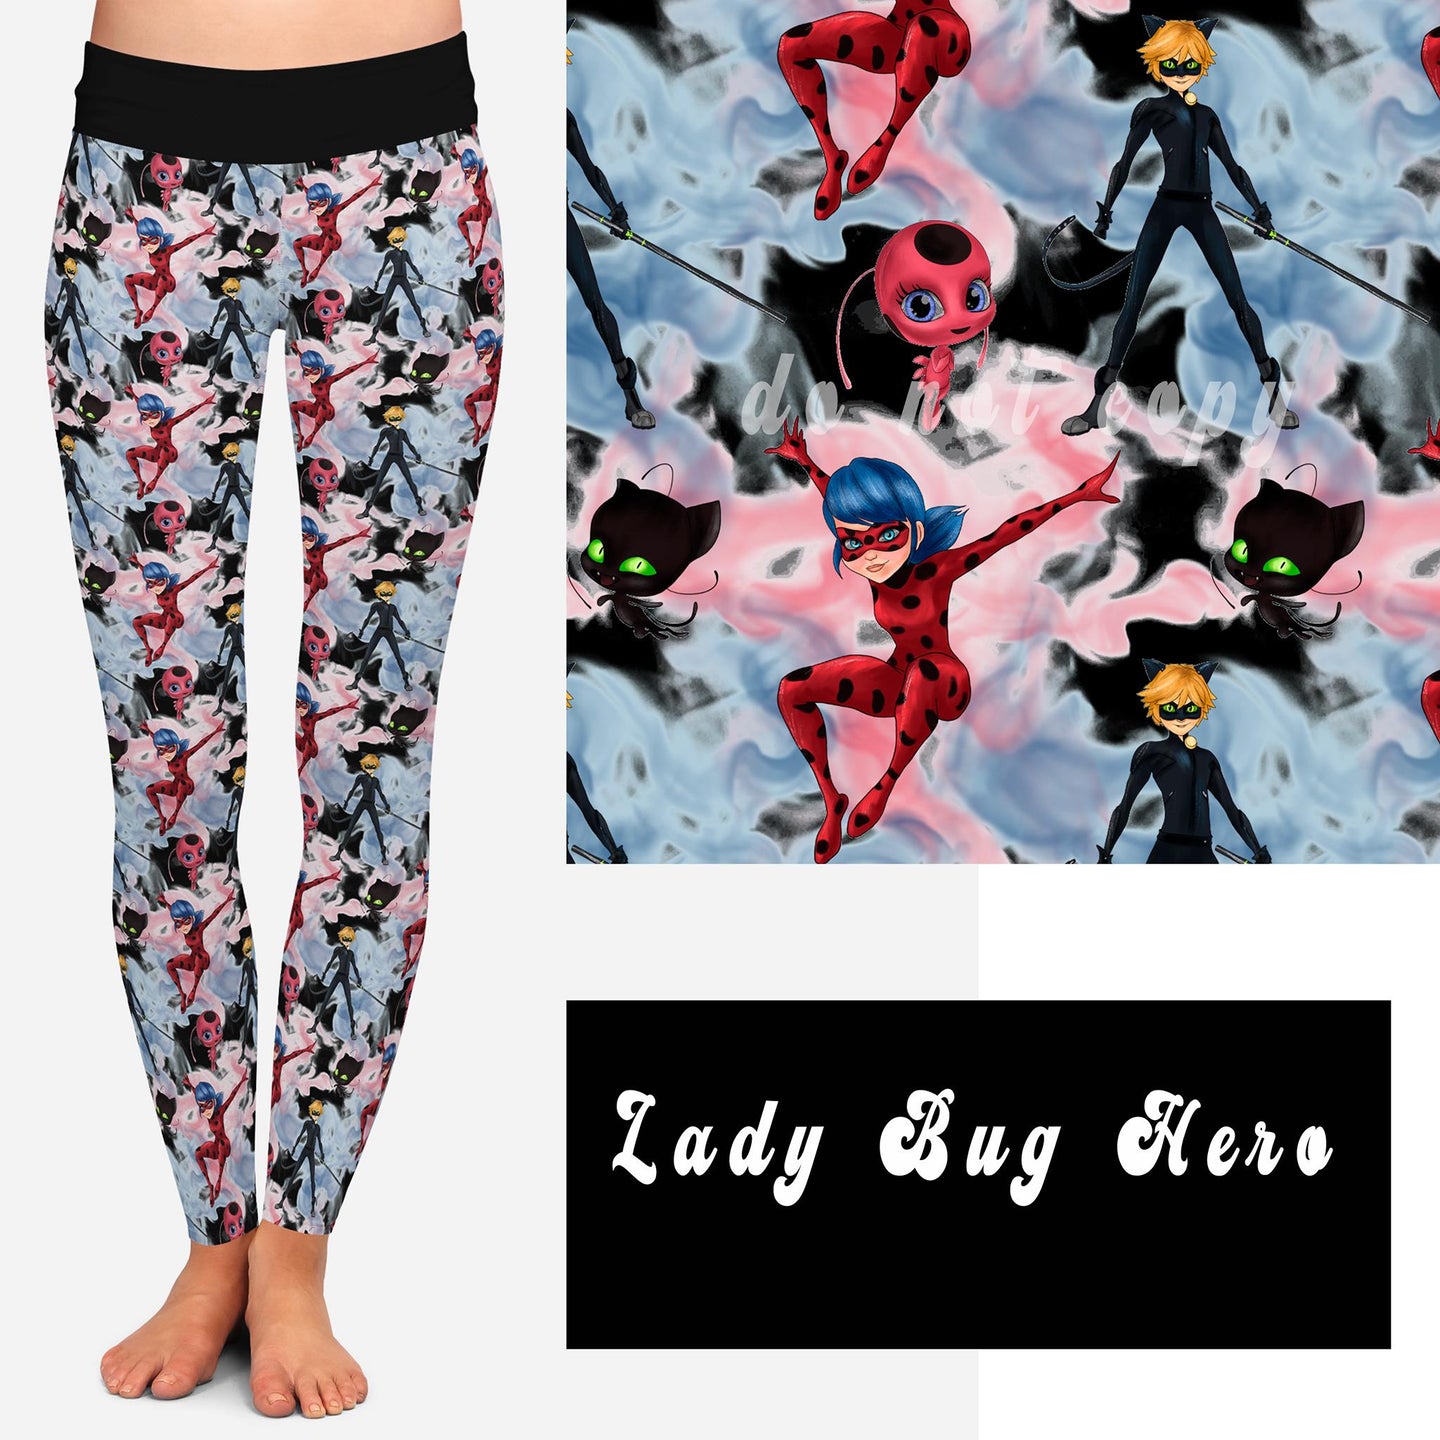 OUTFIT 6-LADY BUG HERO LEGGINGS/JOGGERS PREORDER CLOSING 8/13